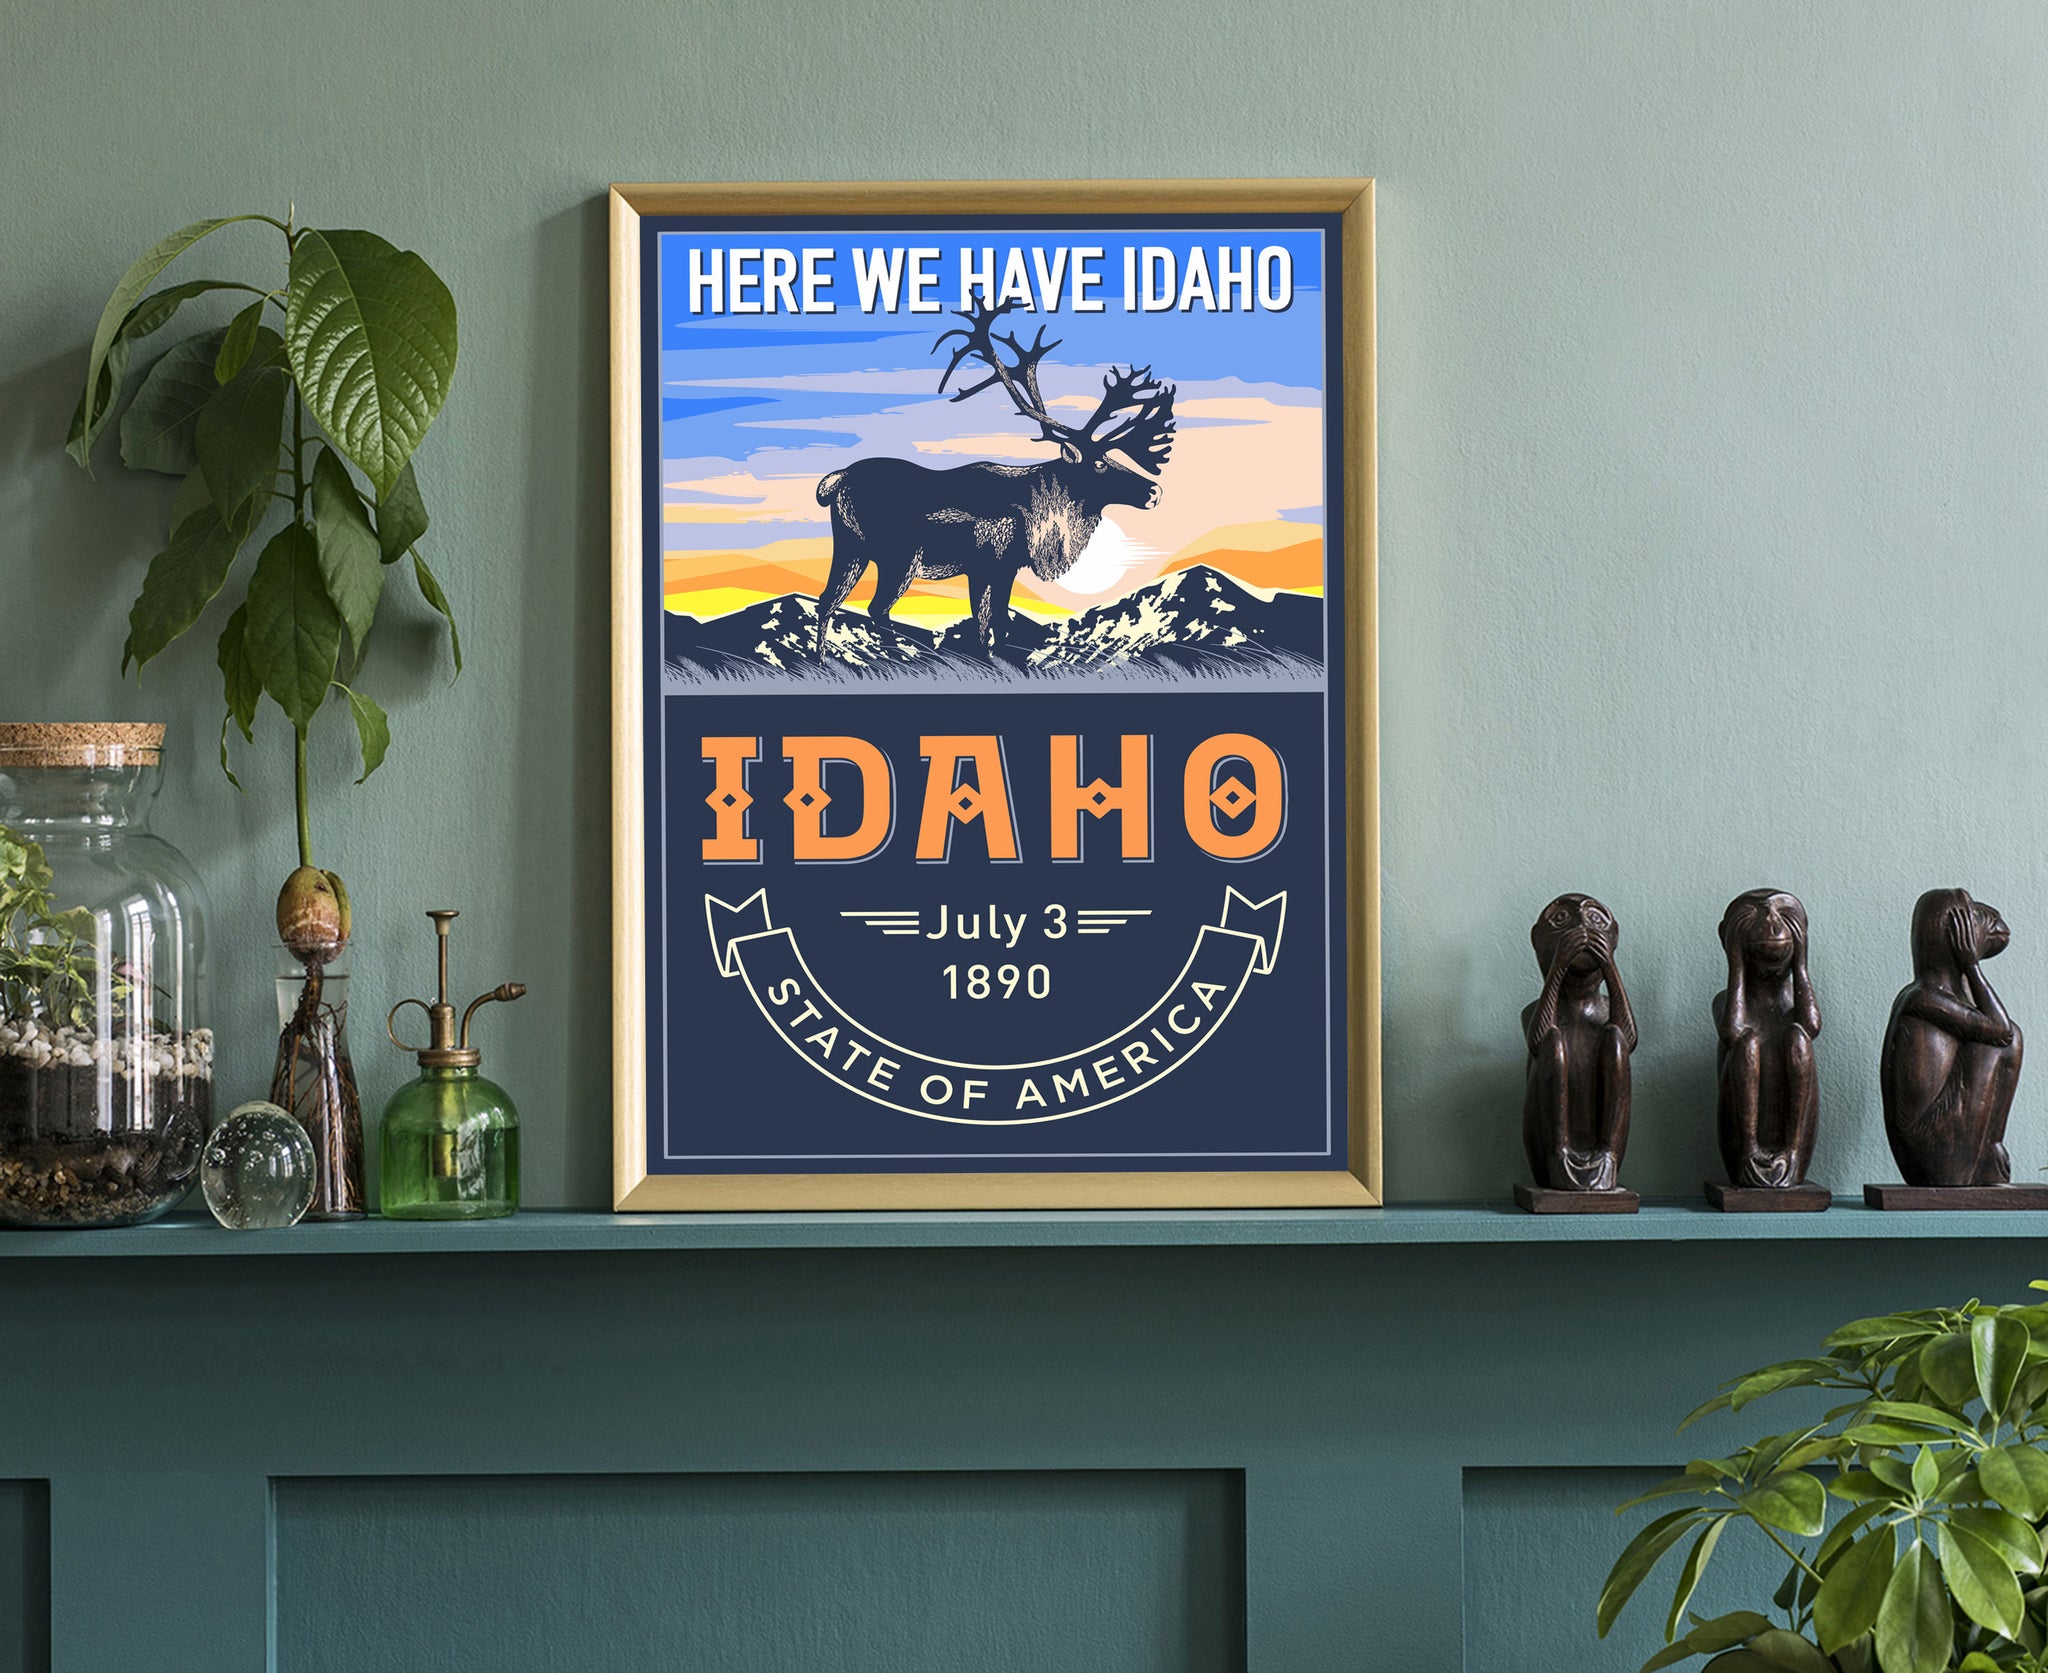 United States Idaho State Poster, Idaho Poster Print, Idaho State Emblem Poster, Retro Travel State Poster, Home and Office Wall Art